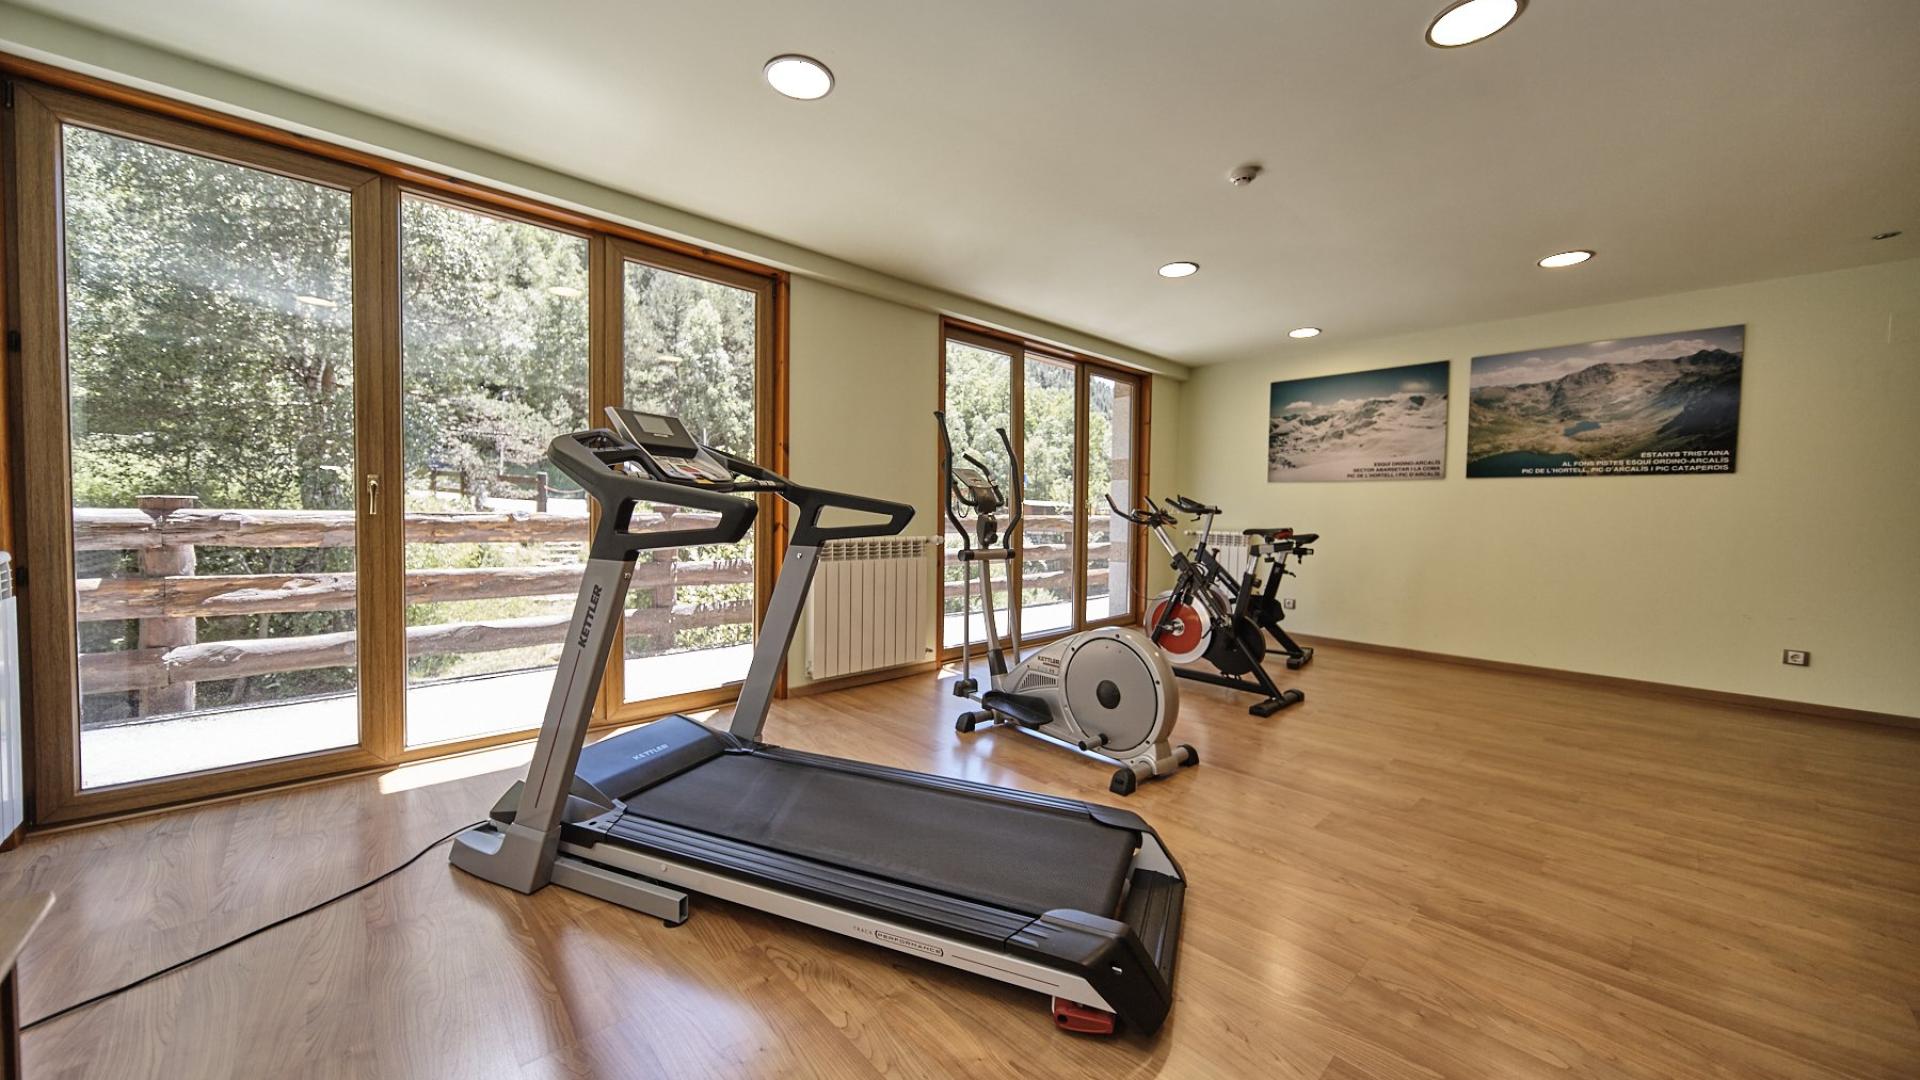 Activate your energy in our gym with views